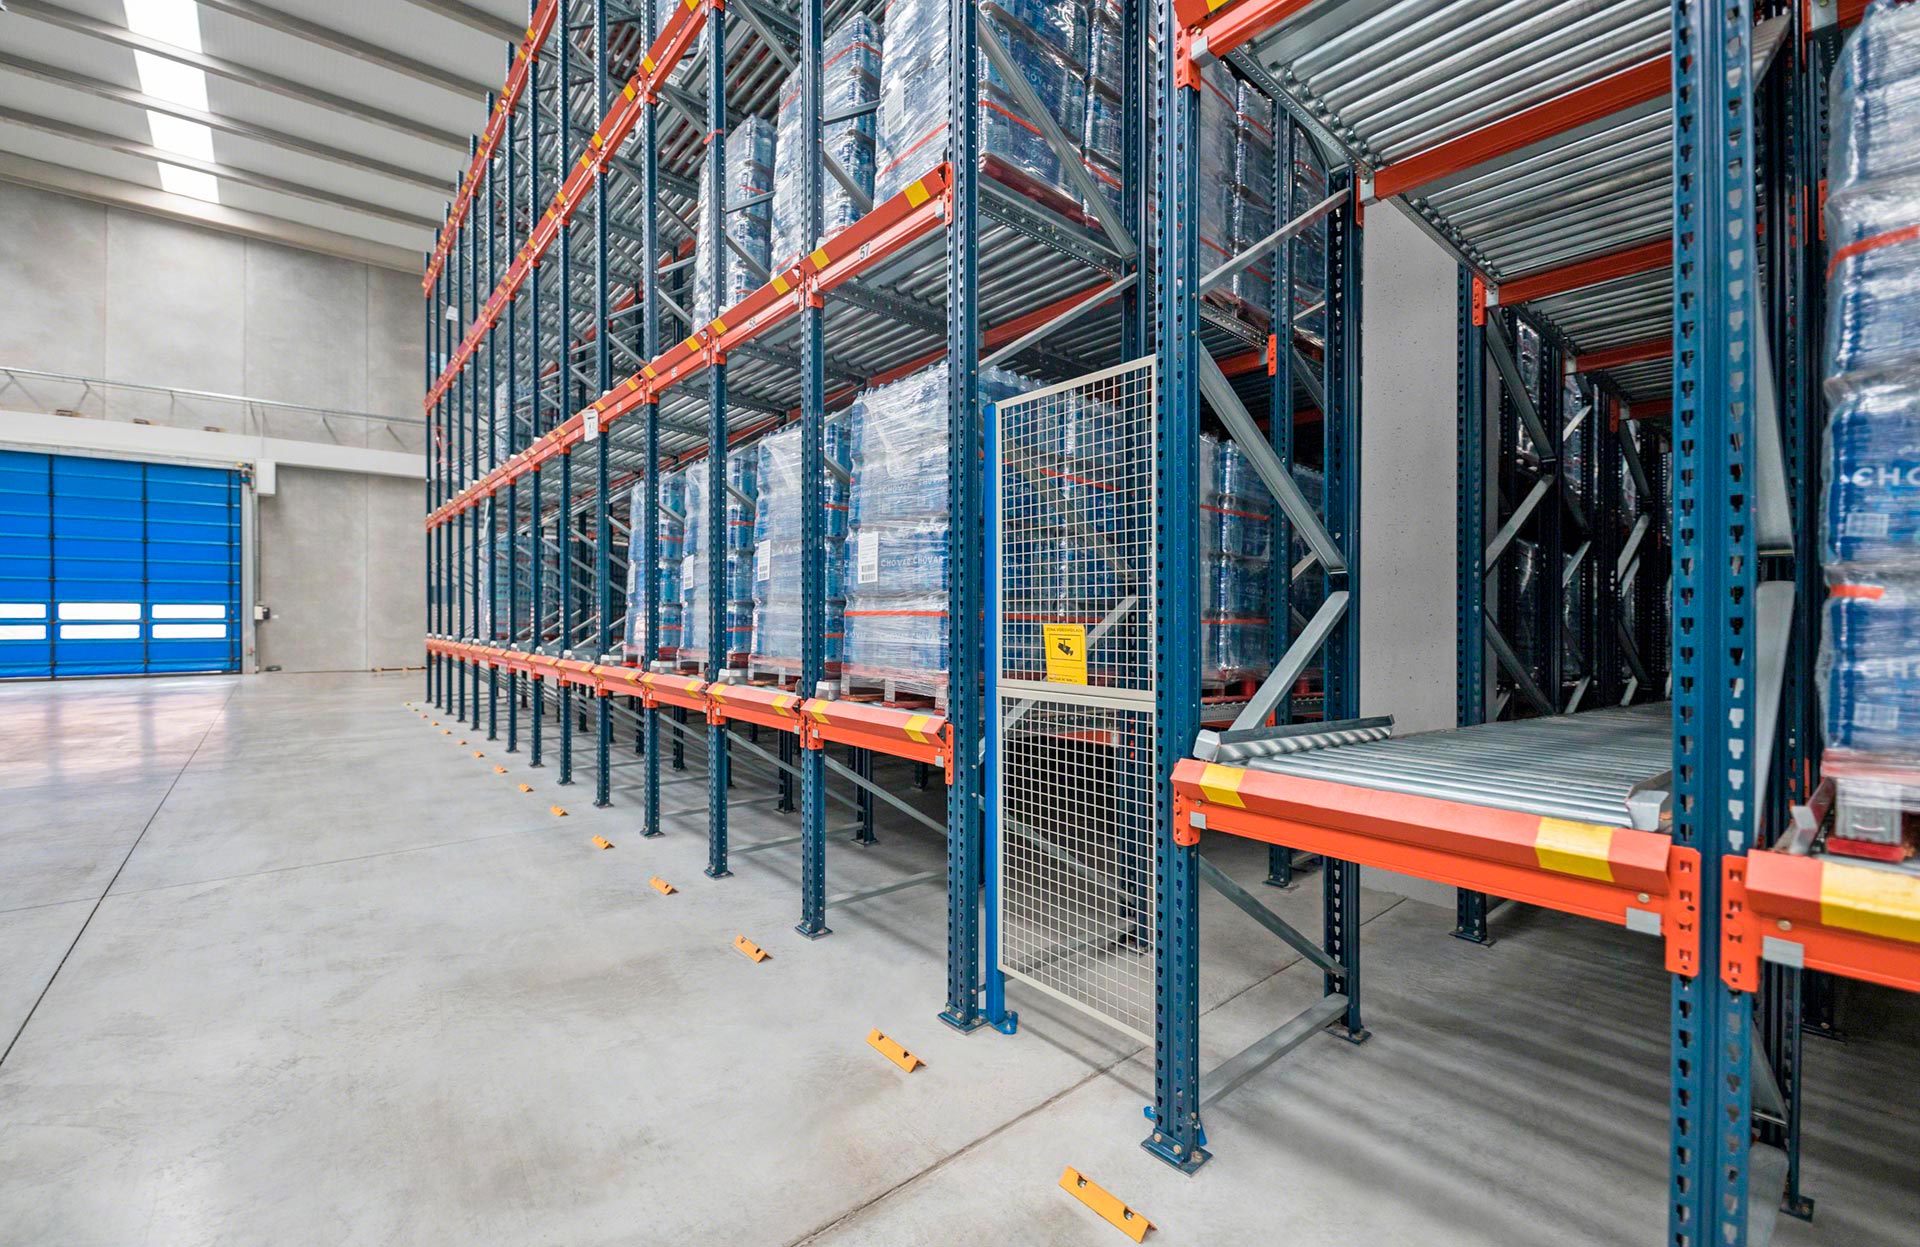 In pallet flow rack systems, passageways can be formed for repairs or maintenance work